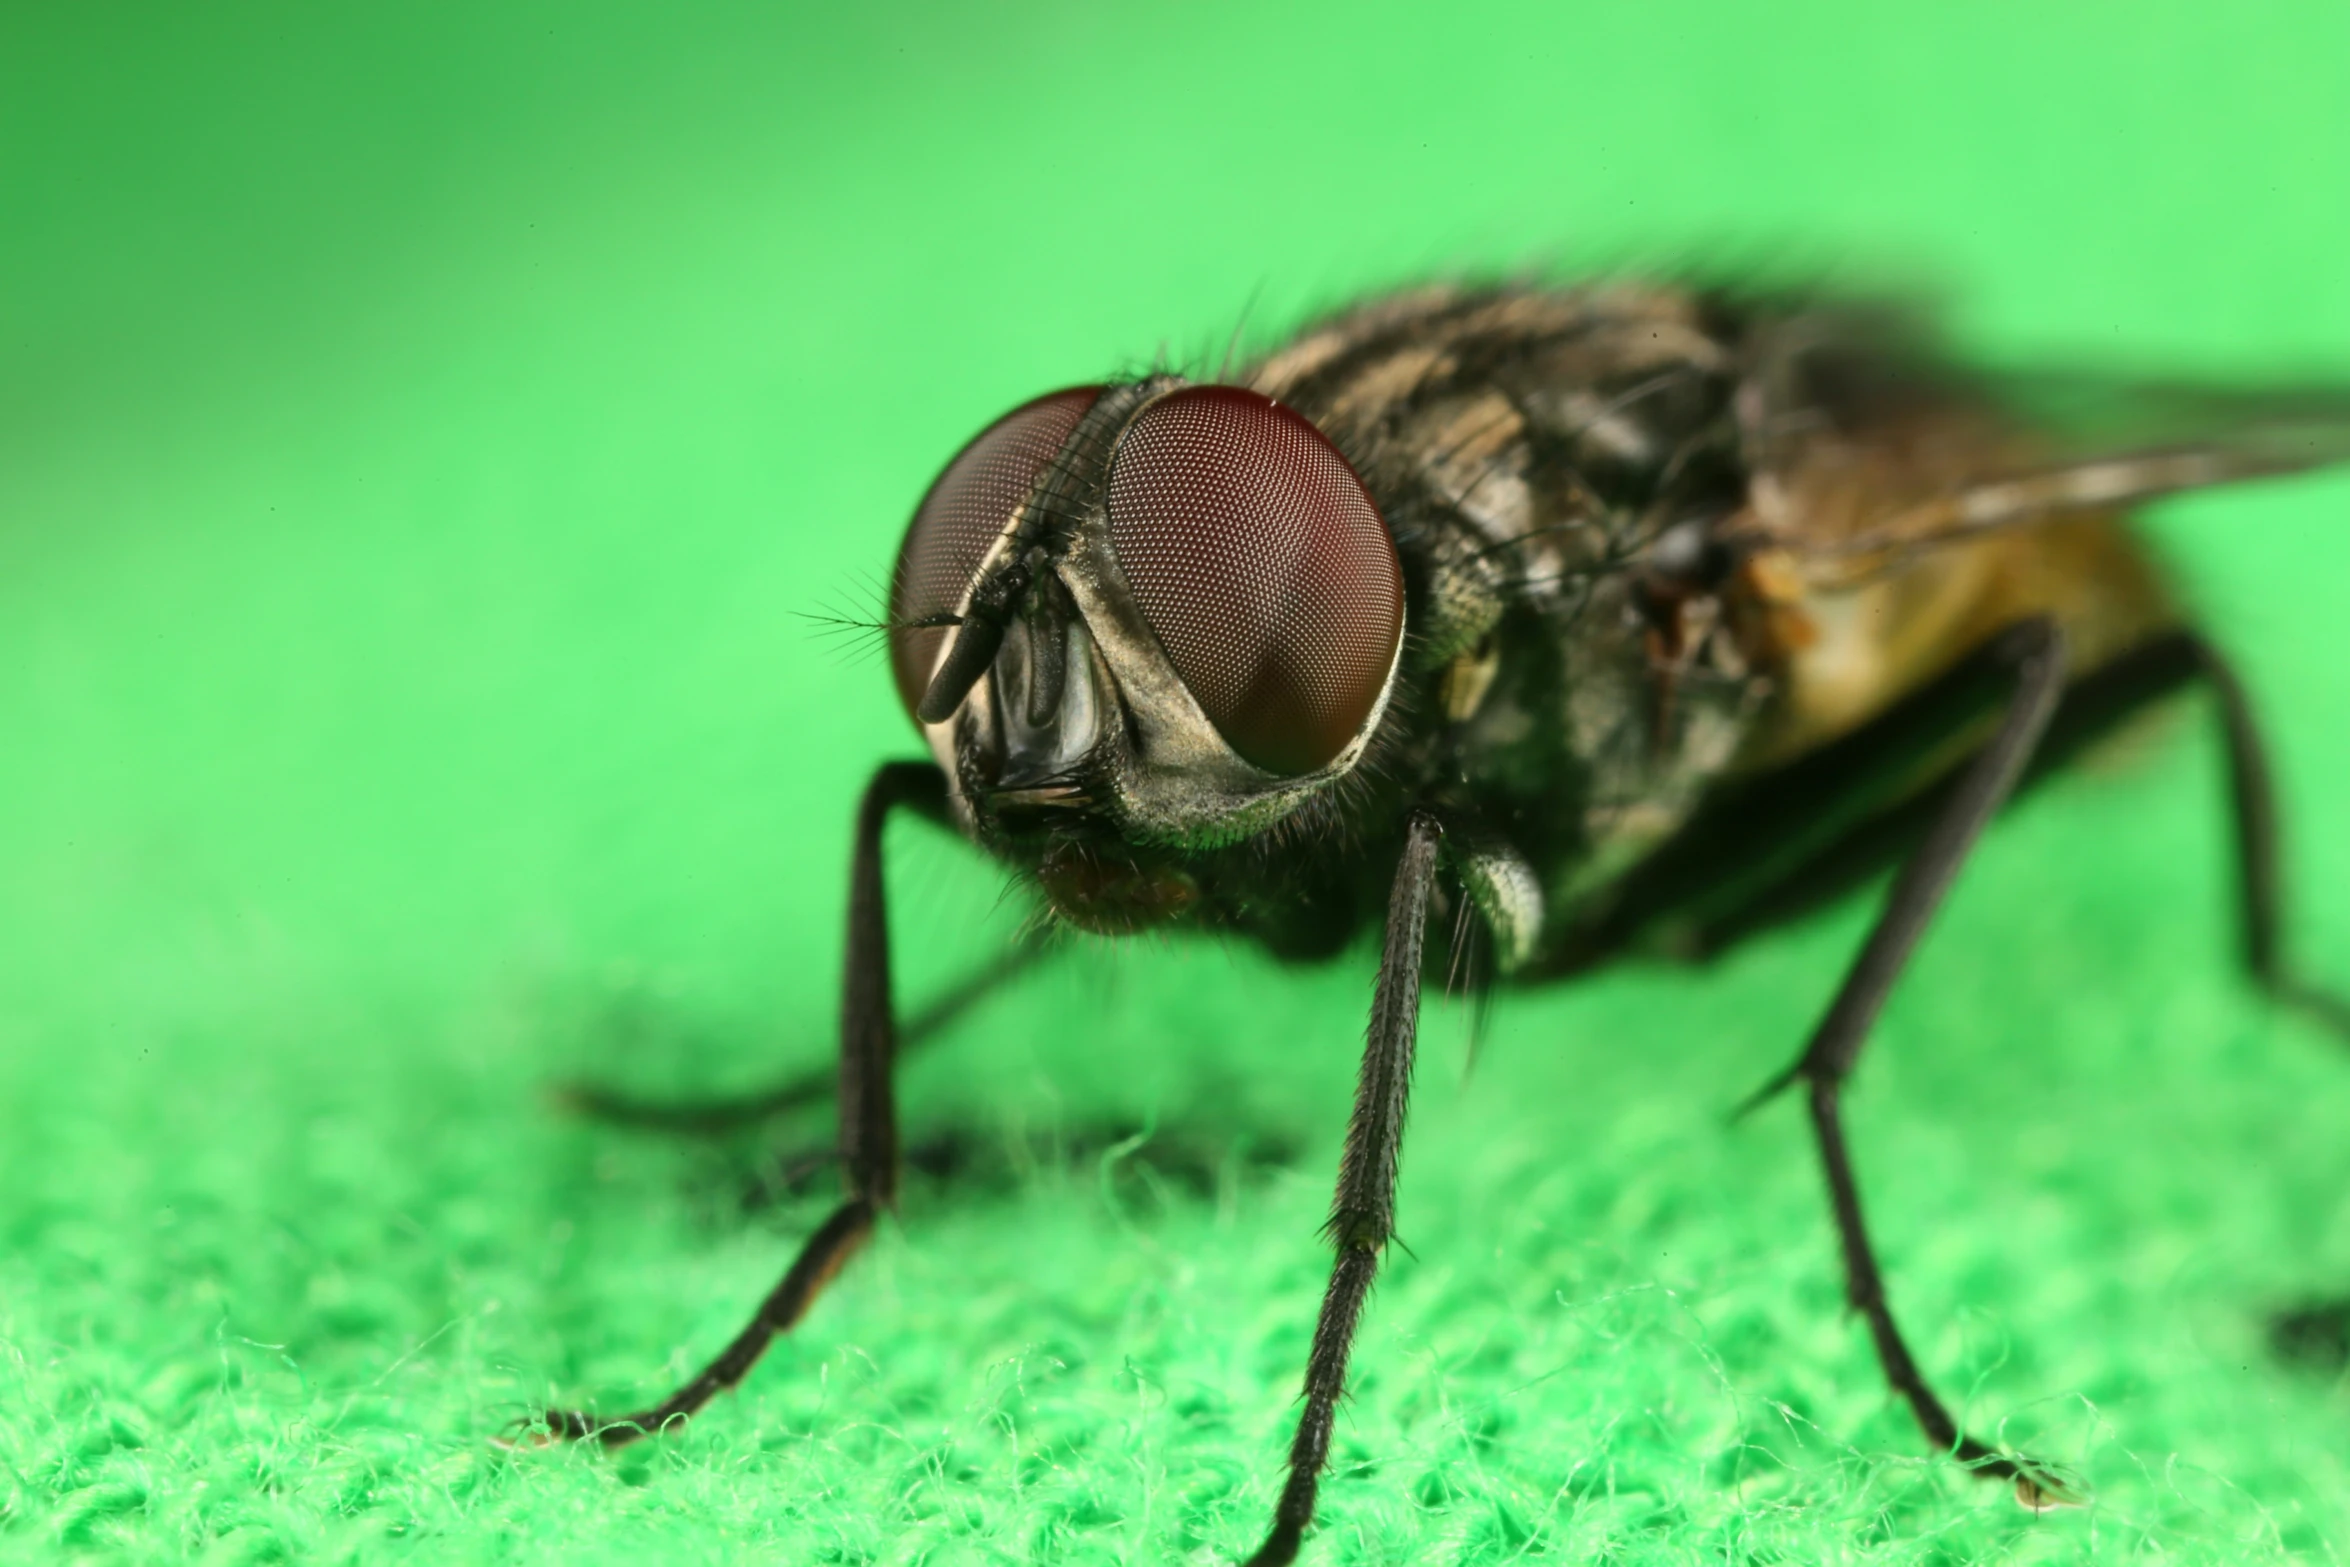 the fly with the black eyes is standing on the green surface